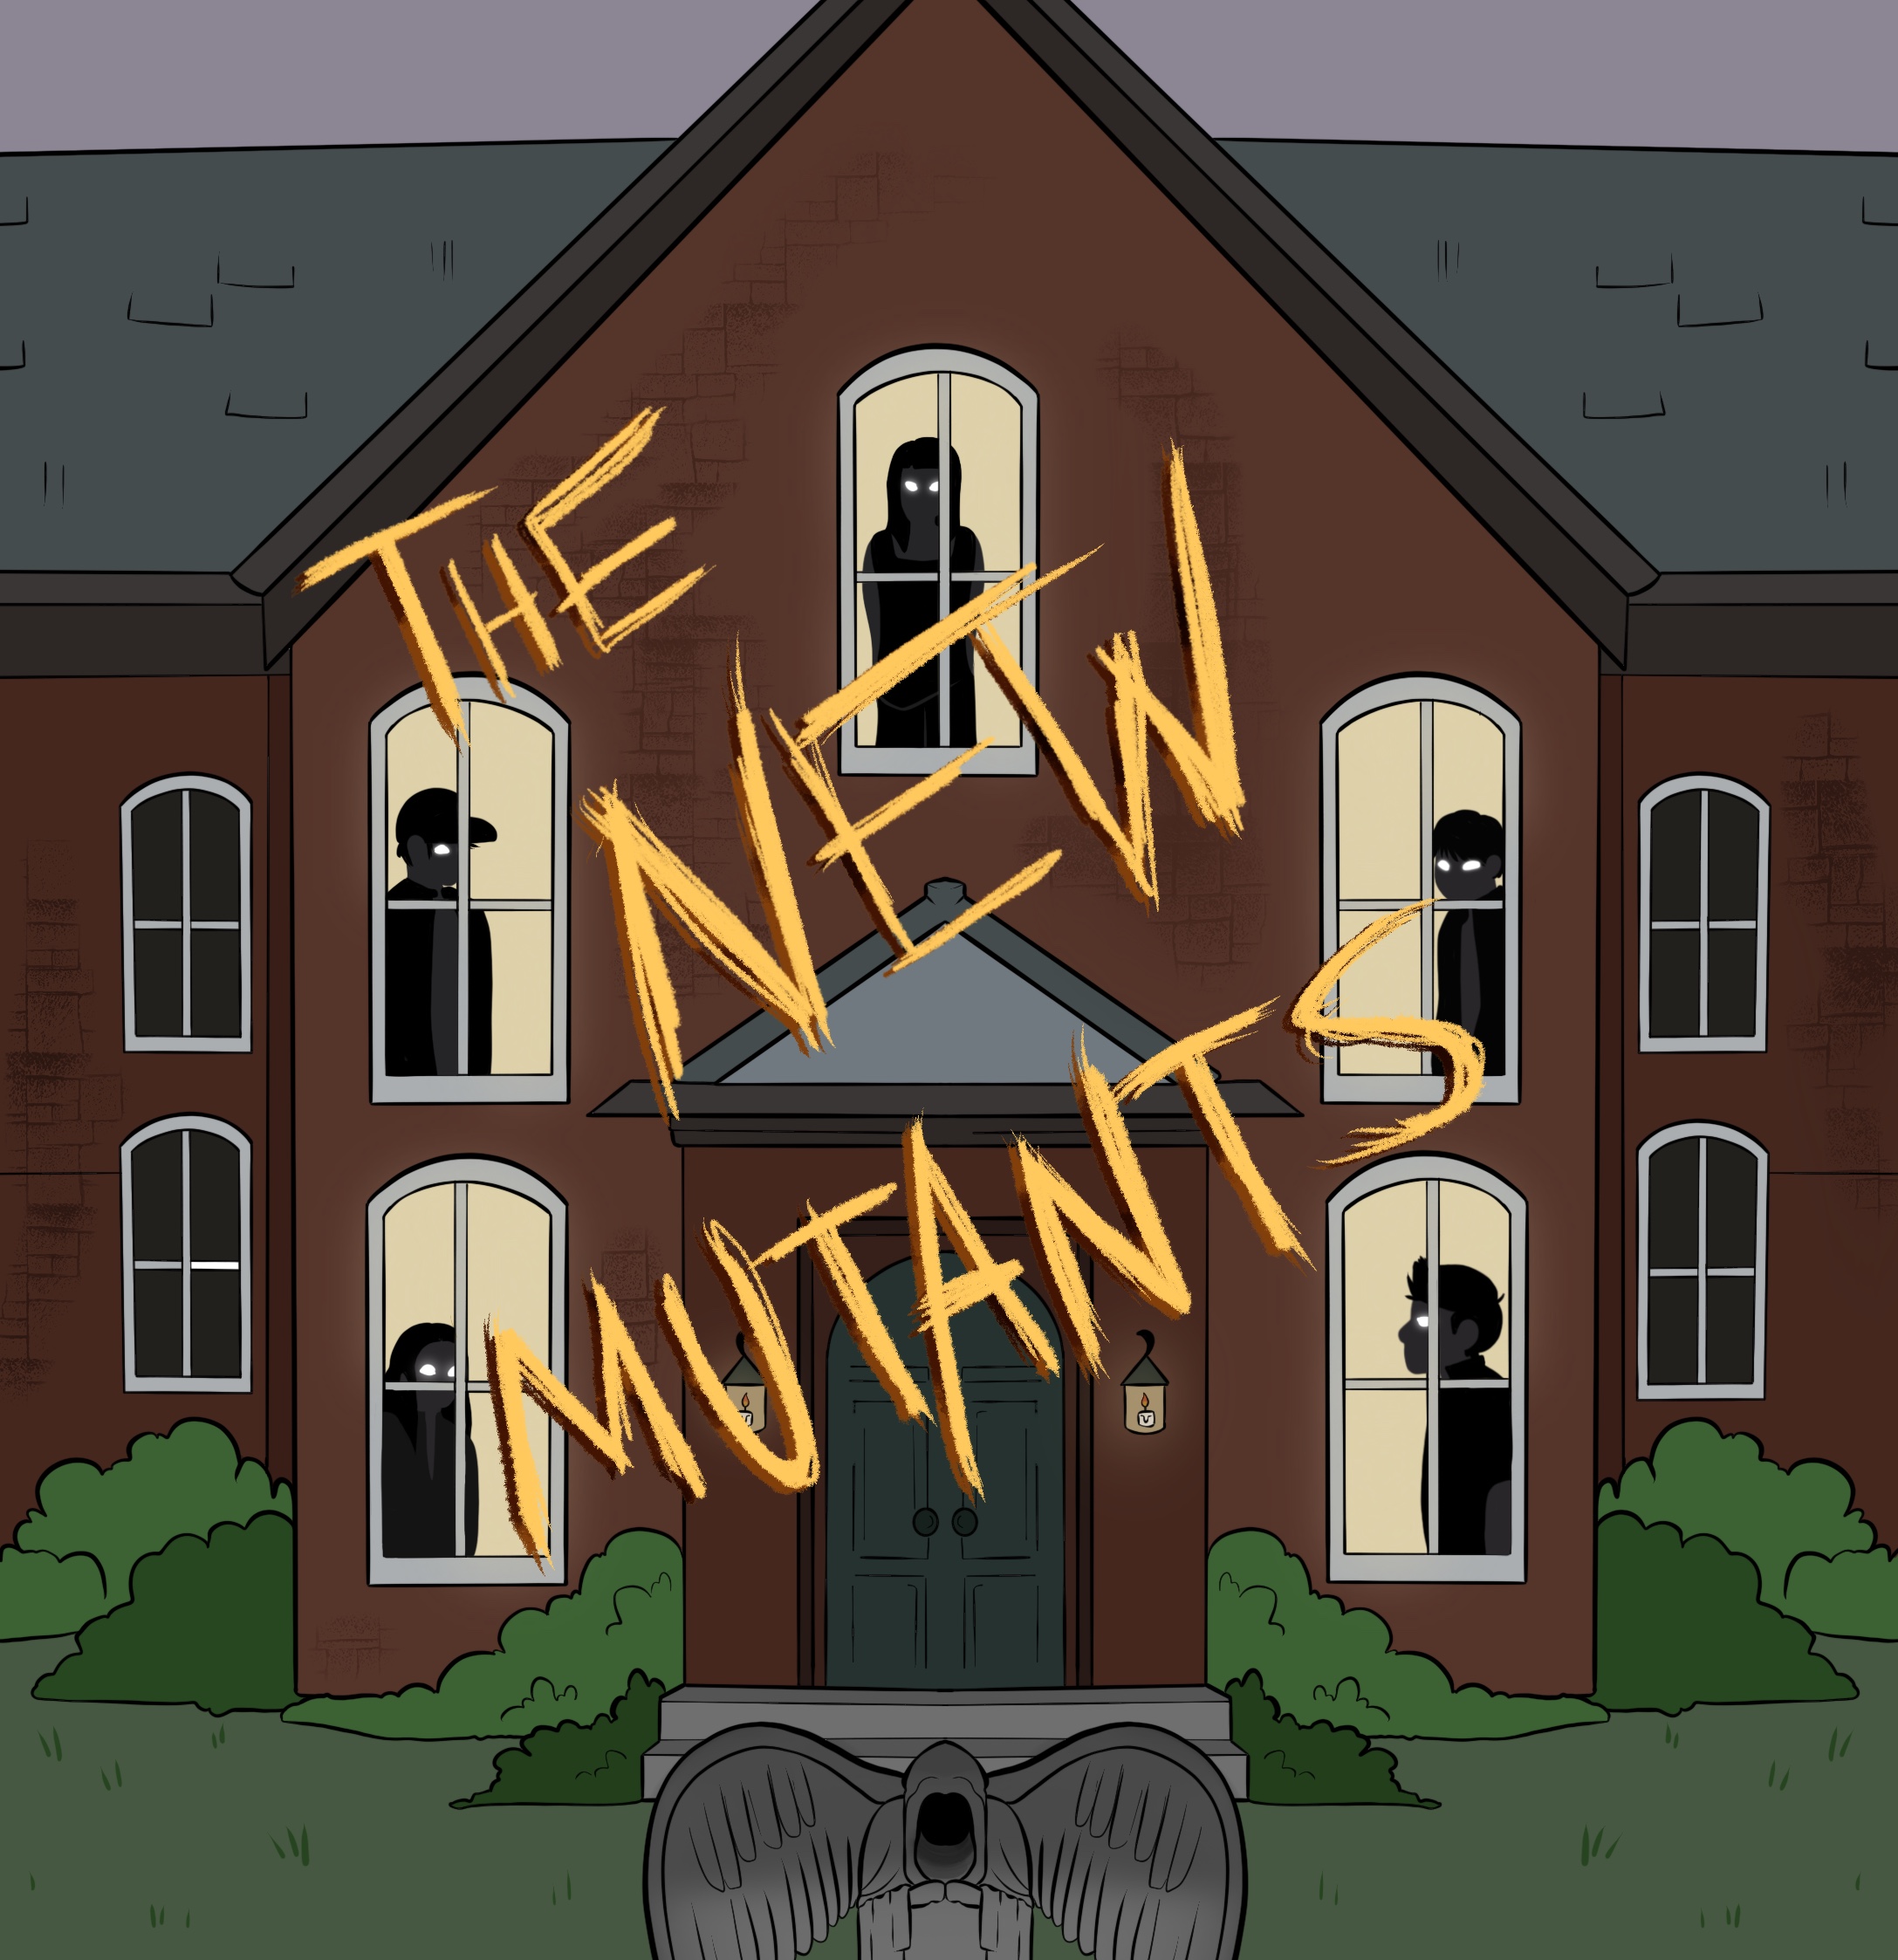 “The New Mutants” falls into the clutches of cliche